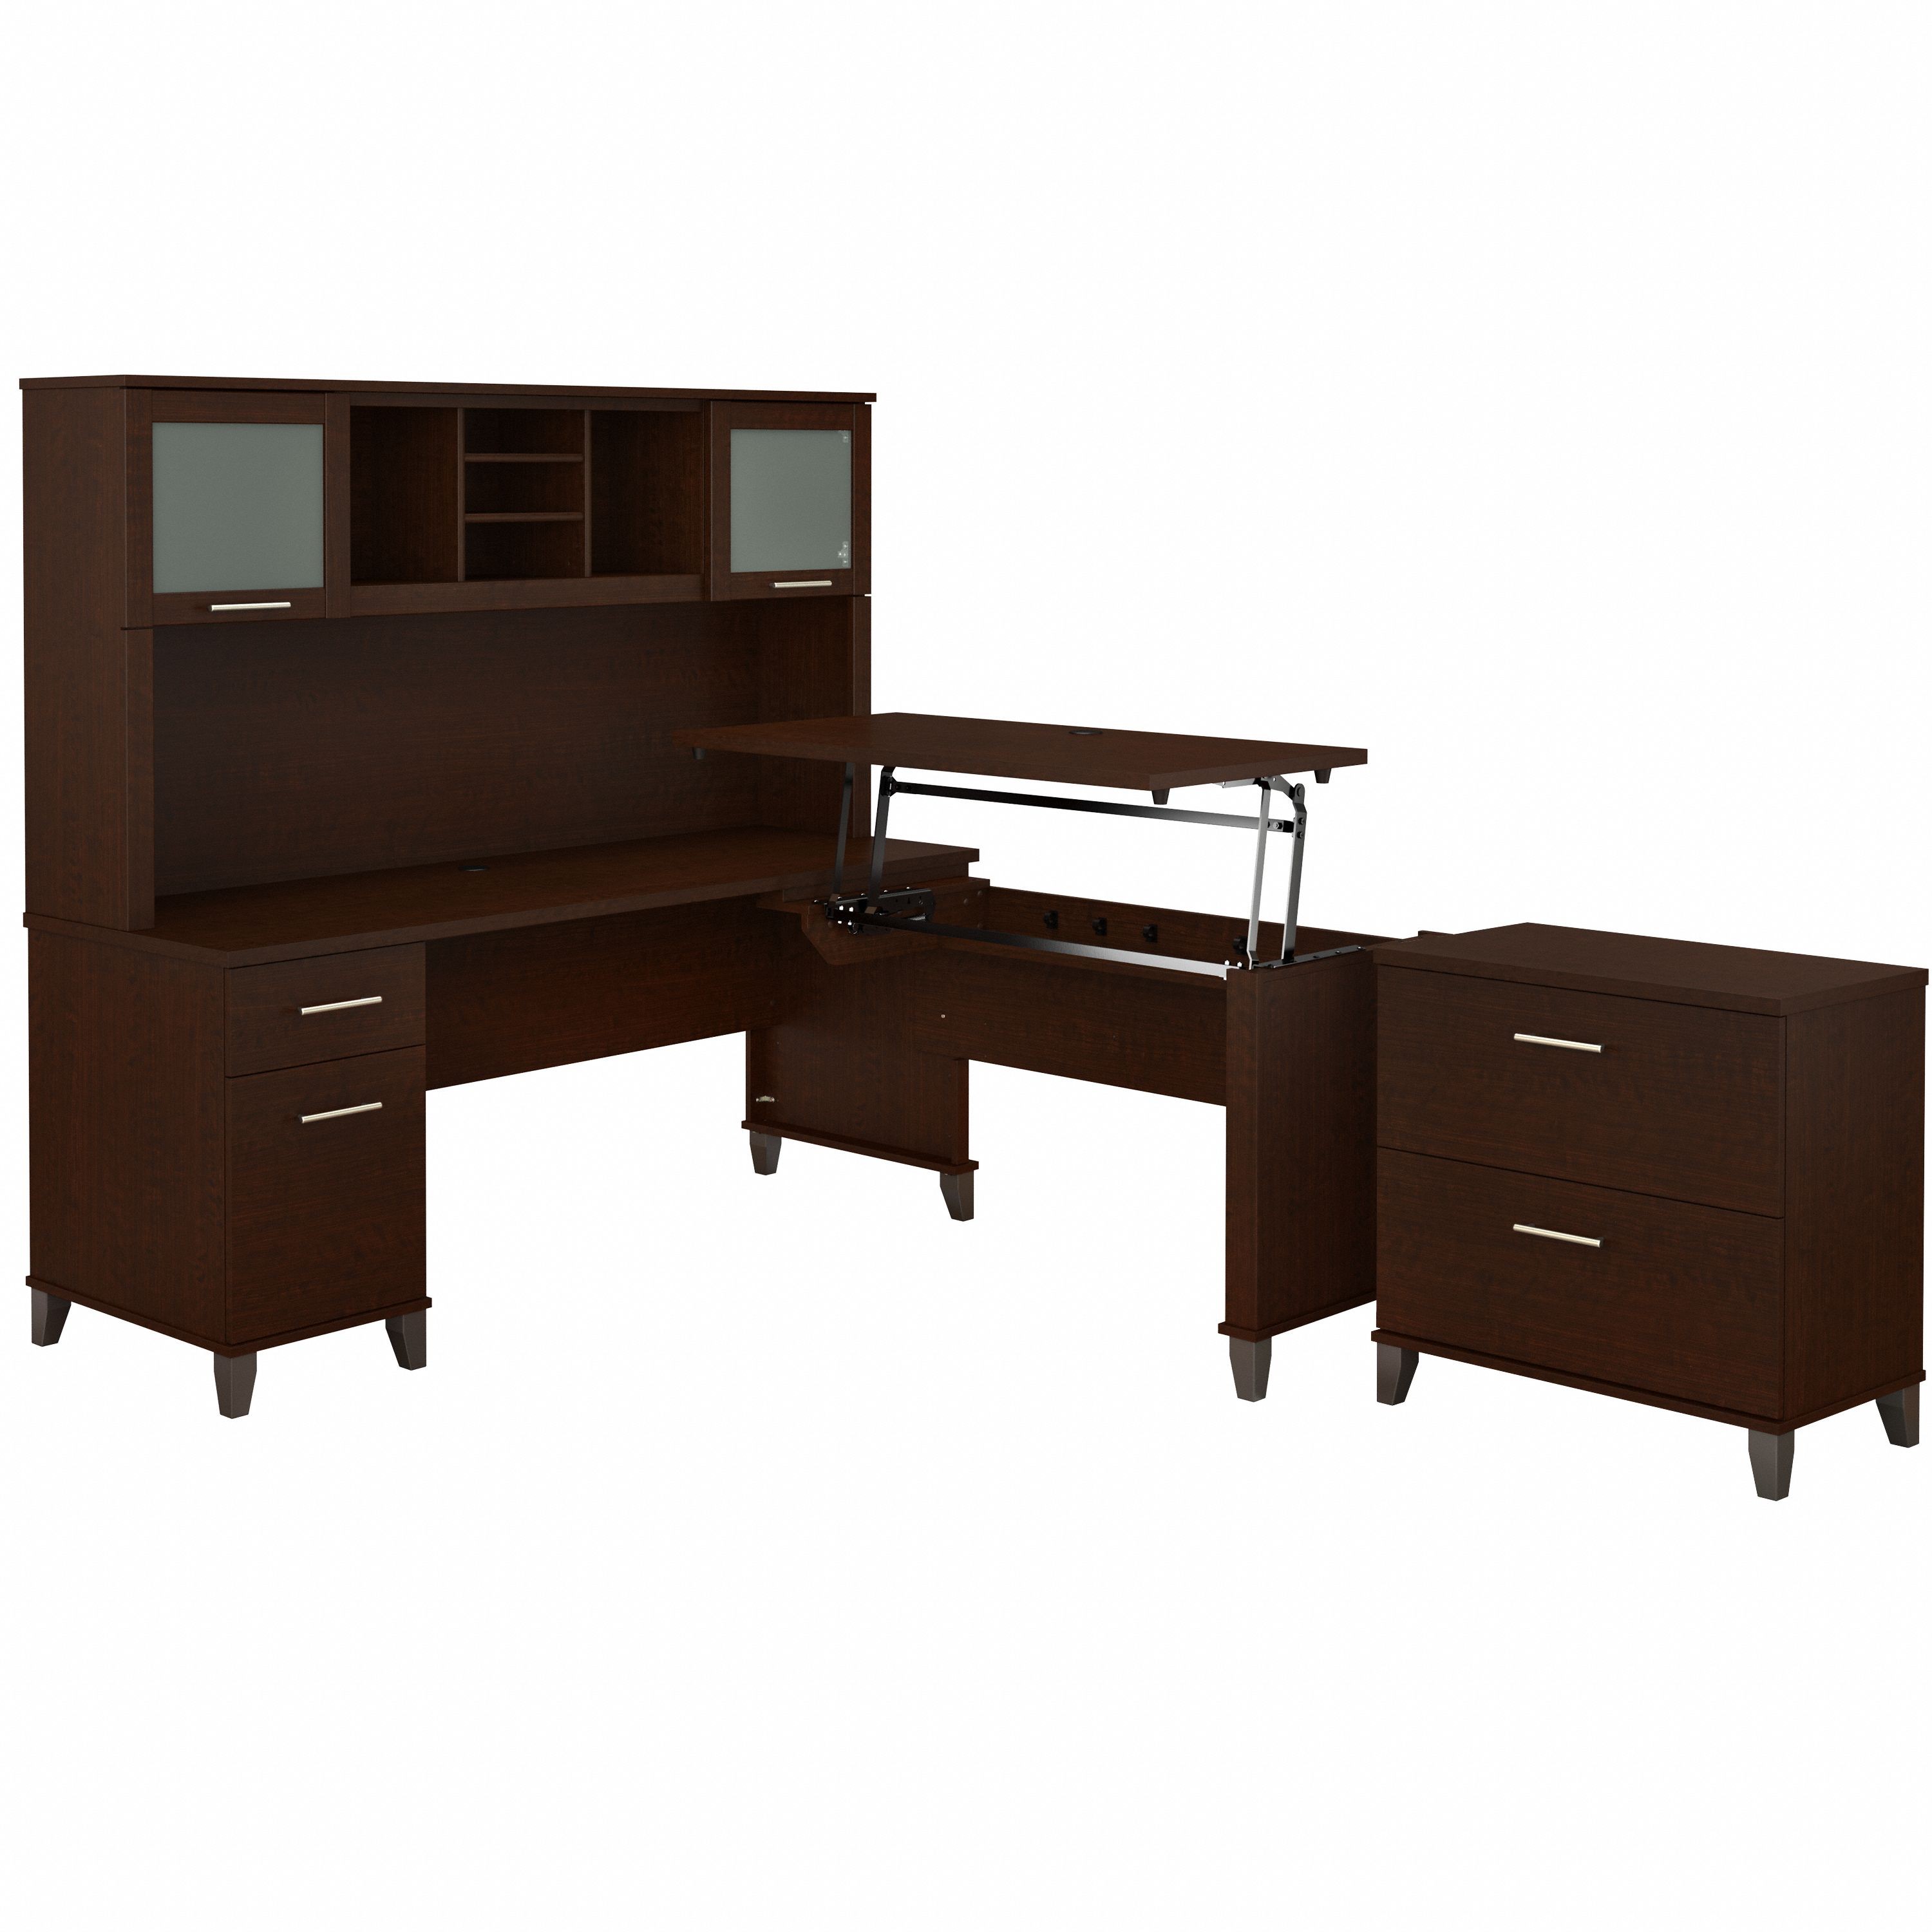 Shop Bush Furniture Somerset 72W 3 Position Sit to Stand L Shaped Desk with Hutch and File Cabinet 02 SET016MR #color_mocha cherry